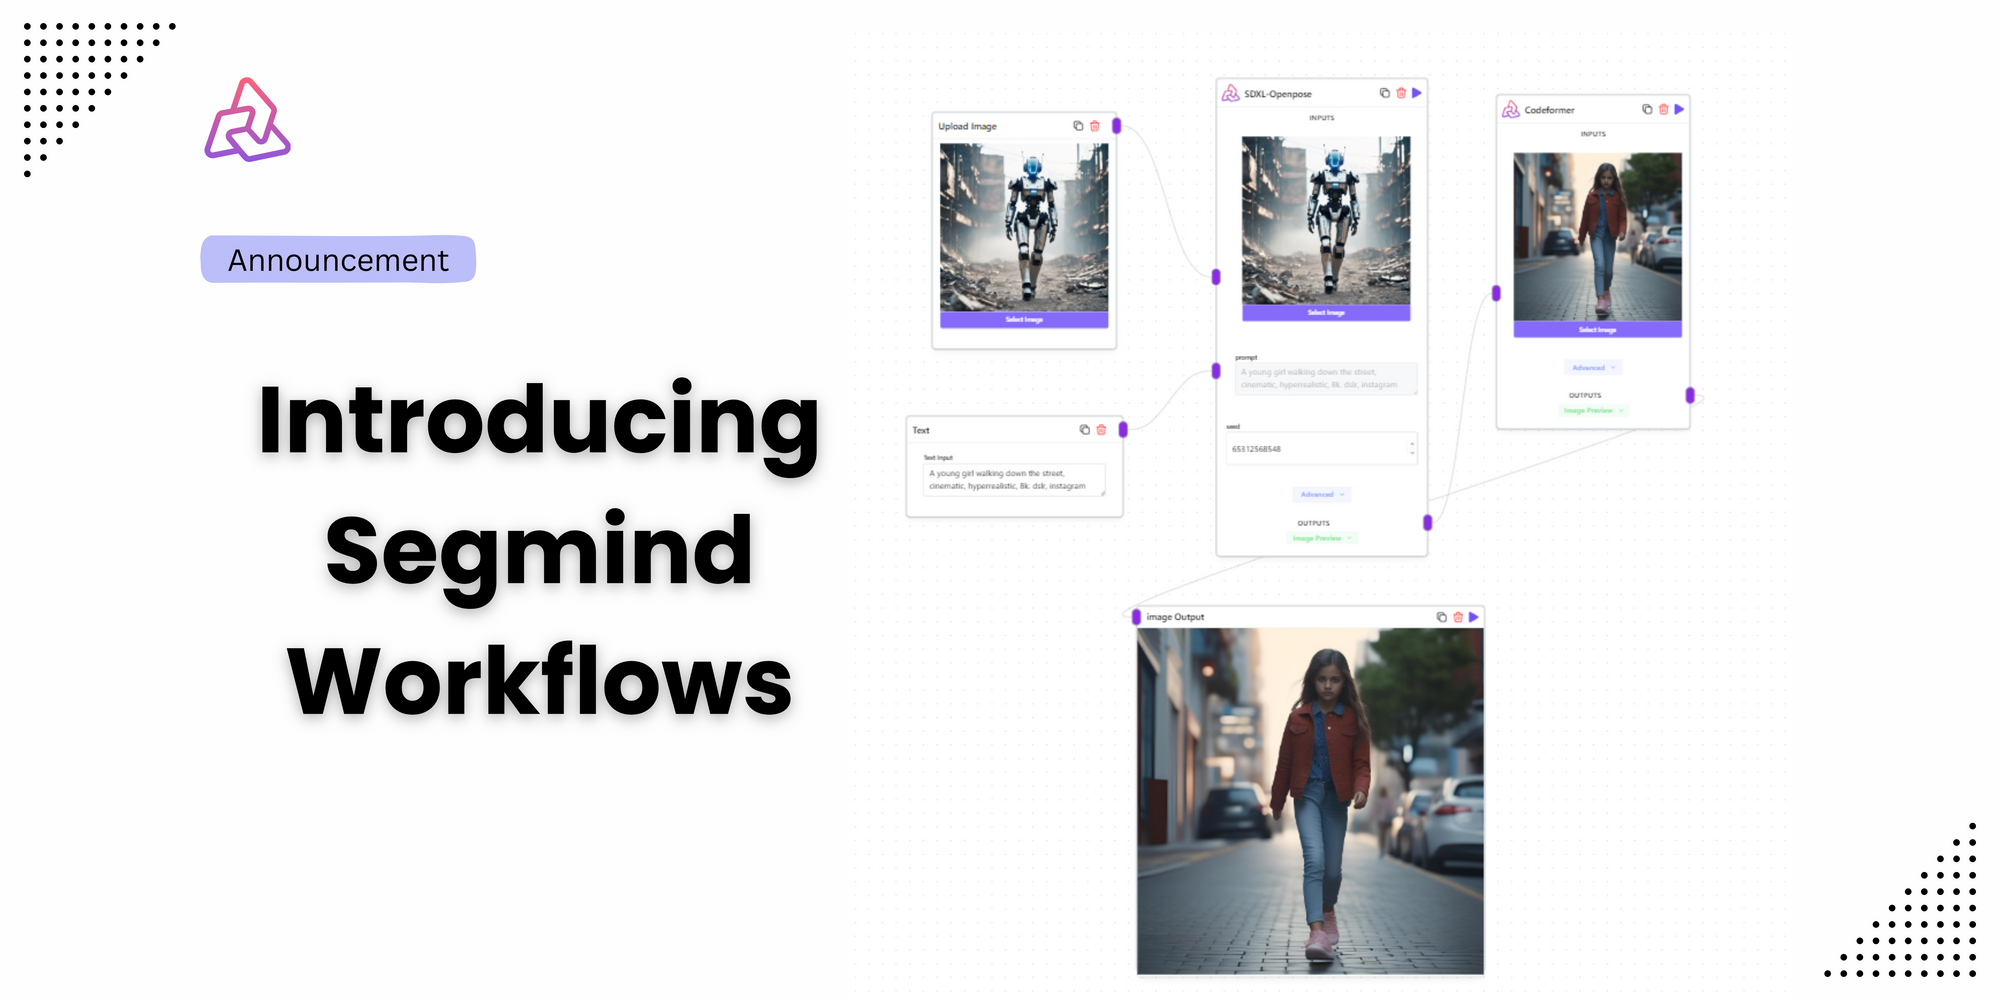 Introducing Segmind Workflows: Revolutionizing Image Creation for Everyone